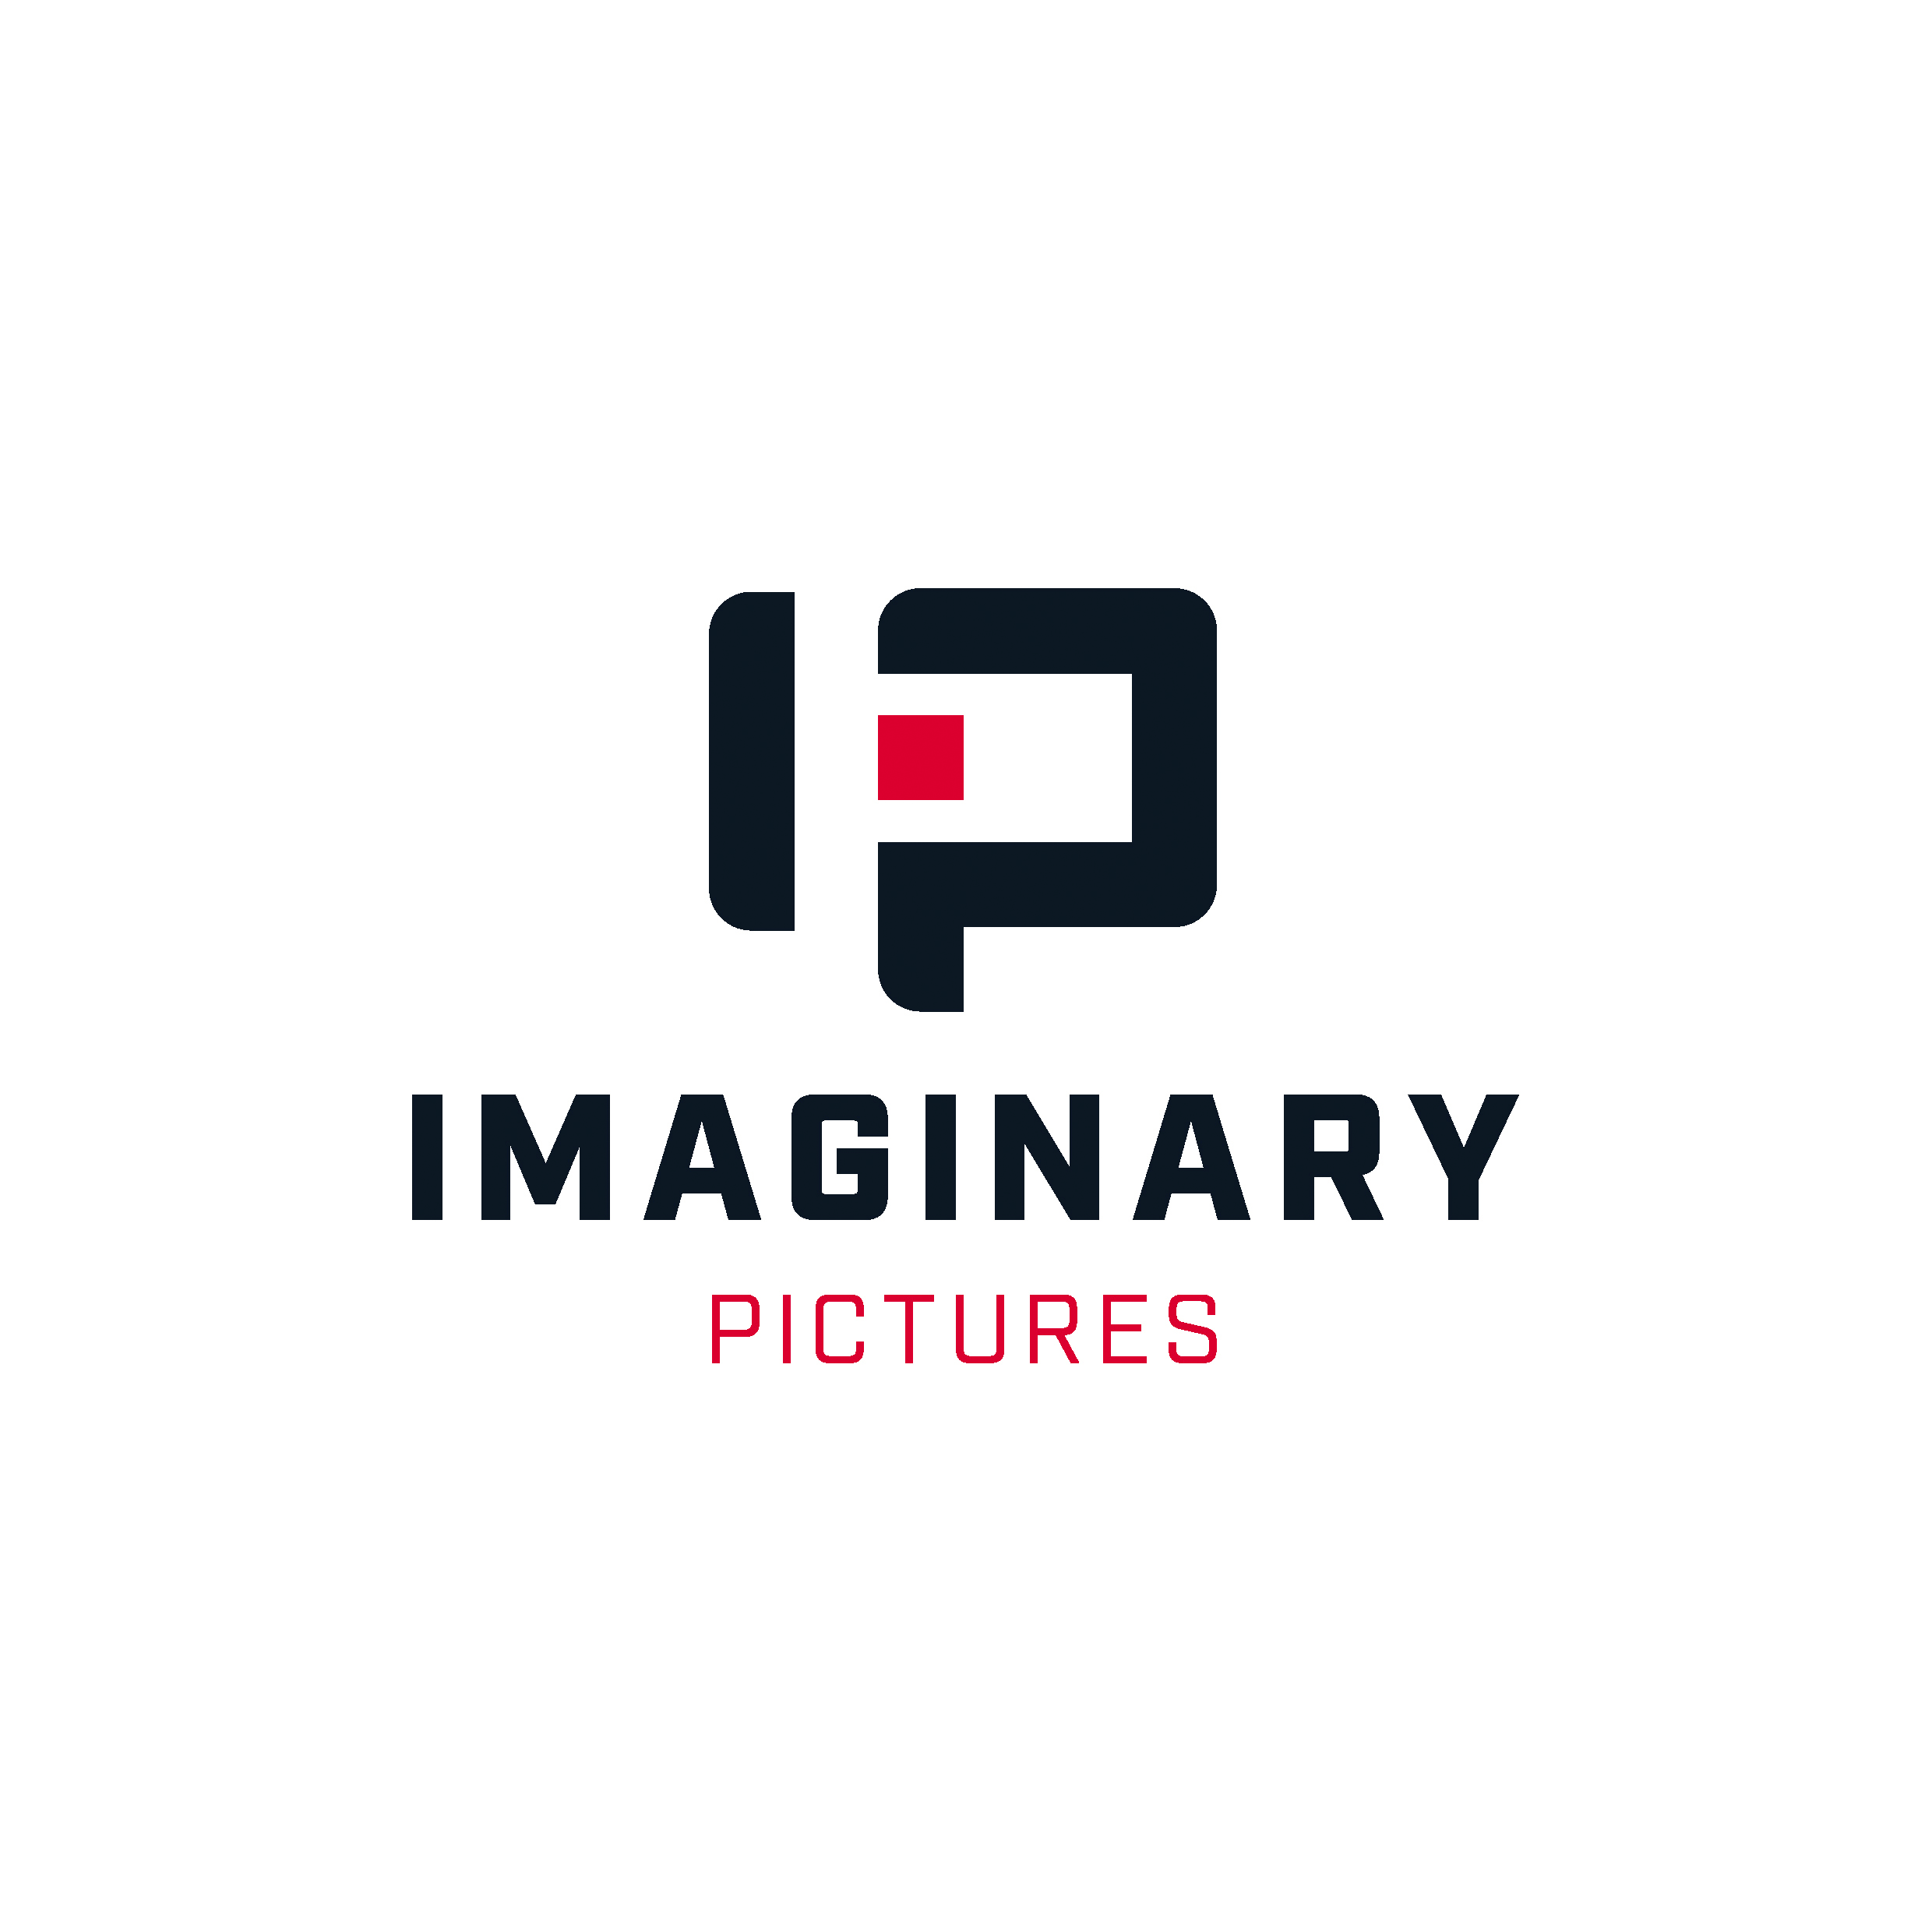 Logo for imaginarypictures.co.uk